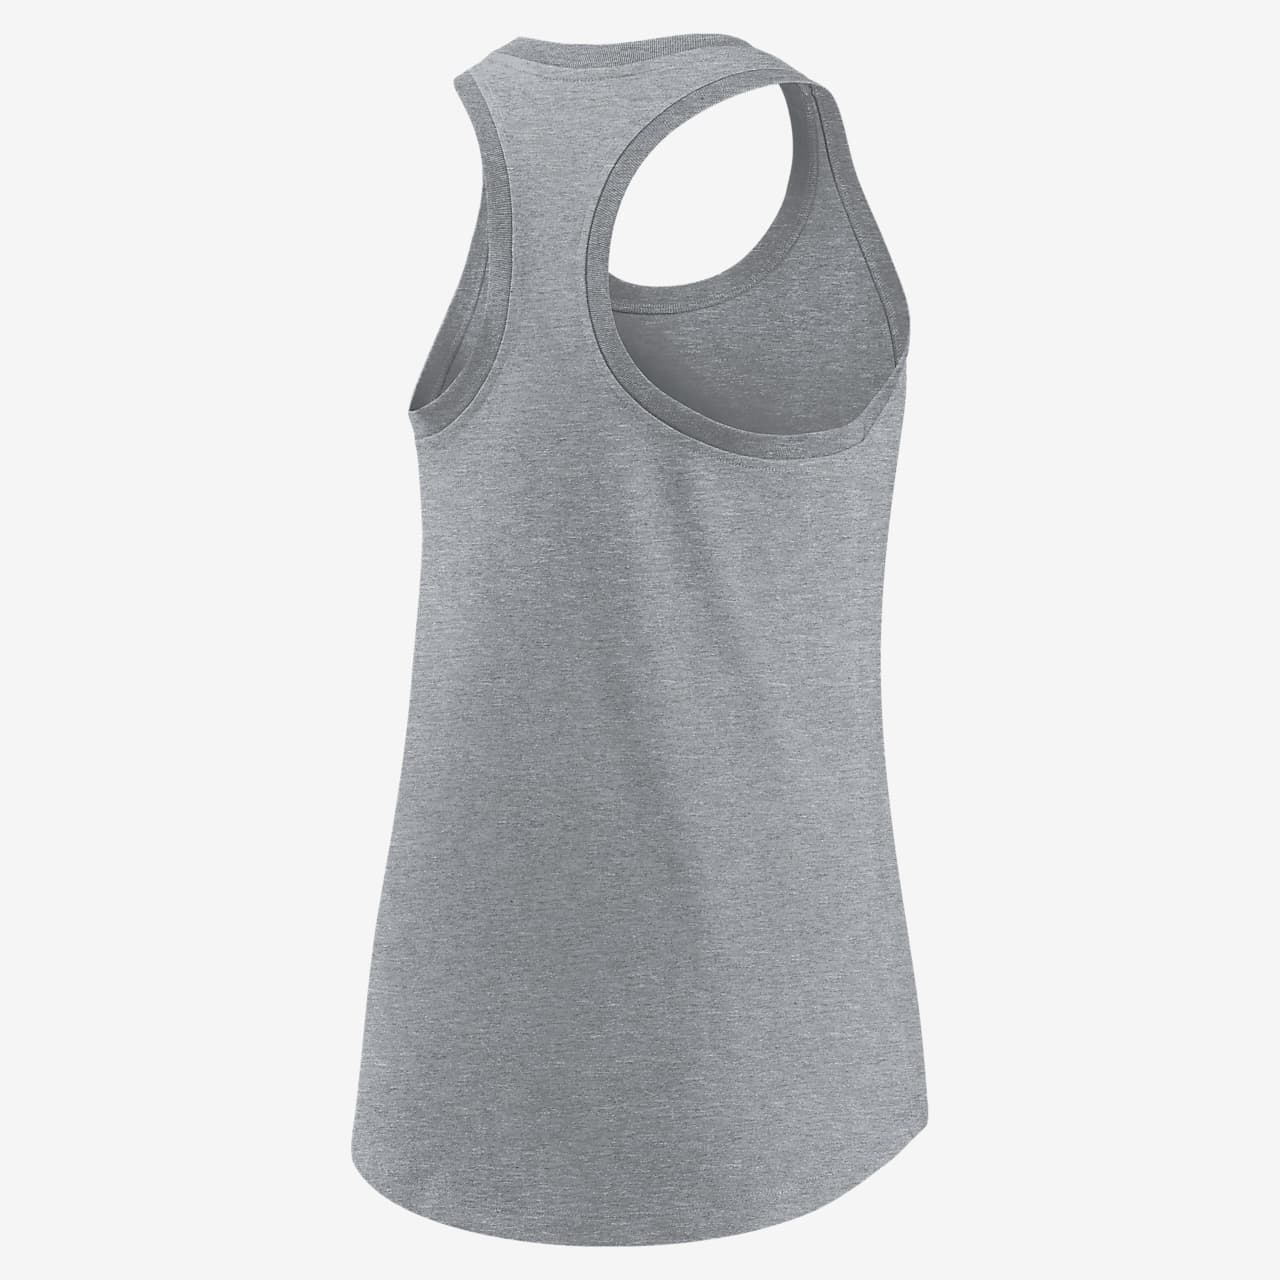 Yankee Grey cut off T-shirt two XL - clothing & accessories - by